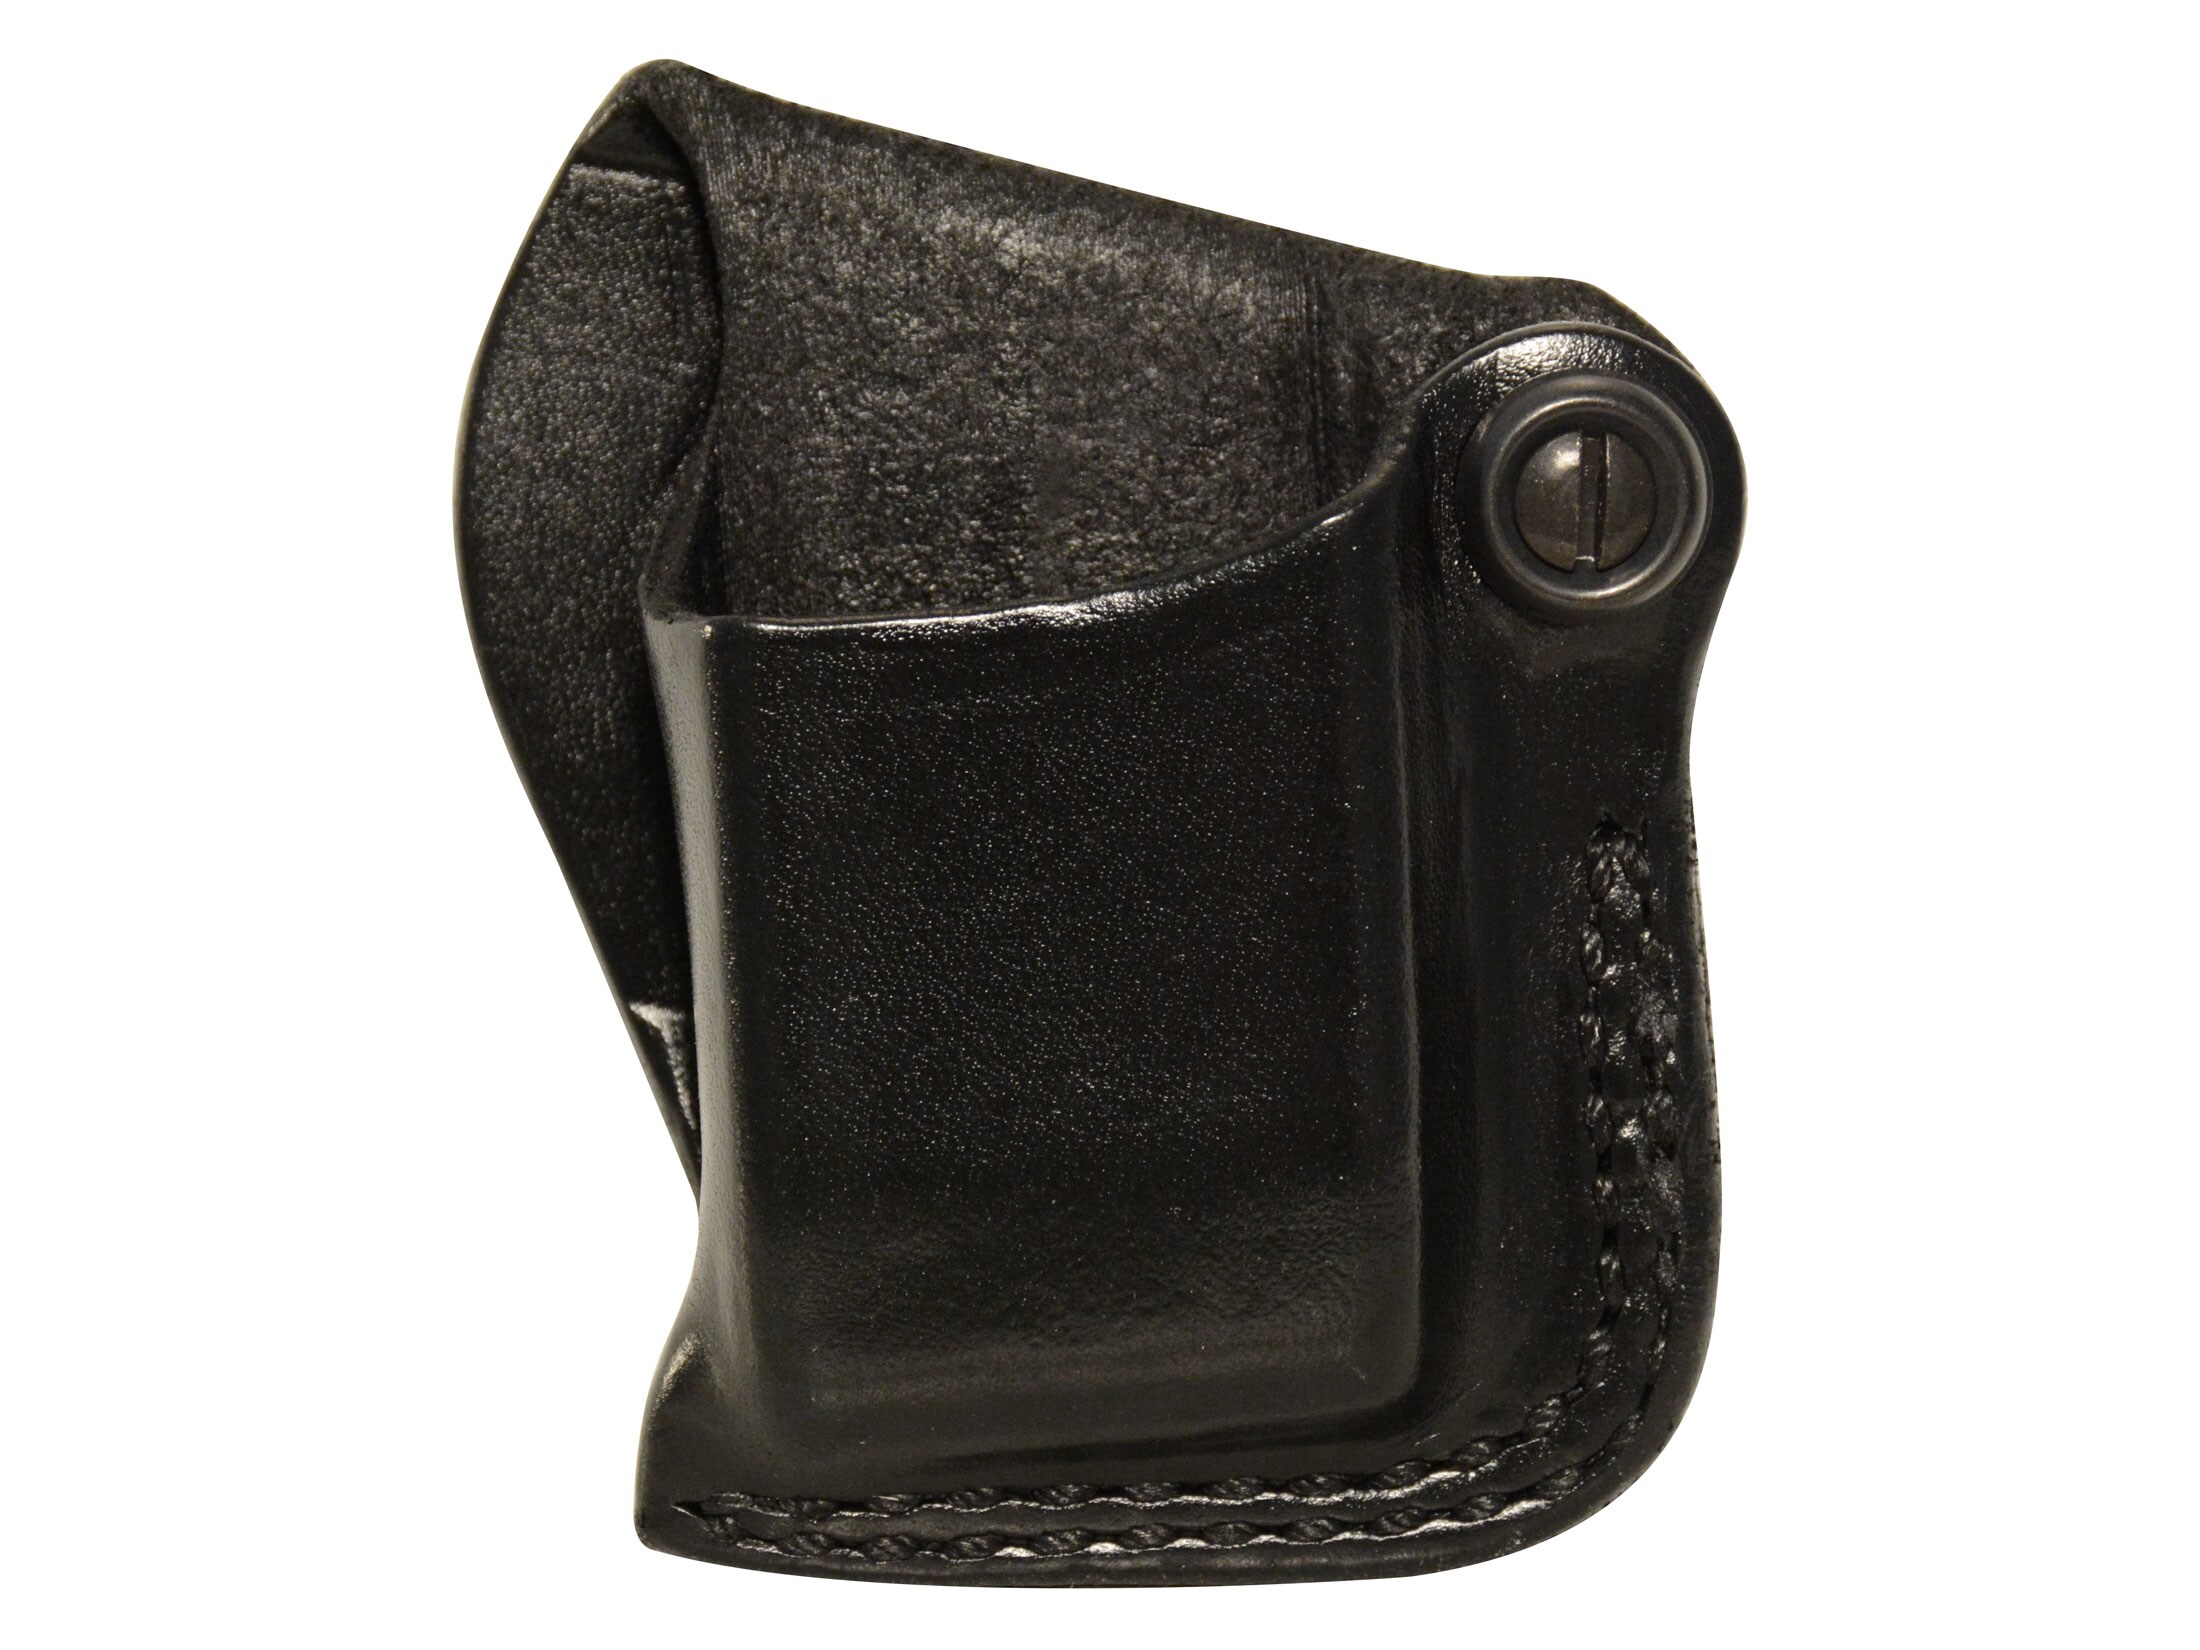 for 9mm Fits Glock 43 and Glock 43X Magazines Leather Magazine Holder 